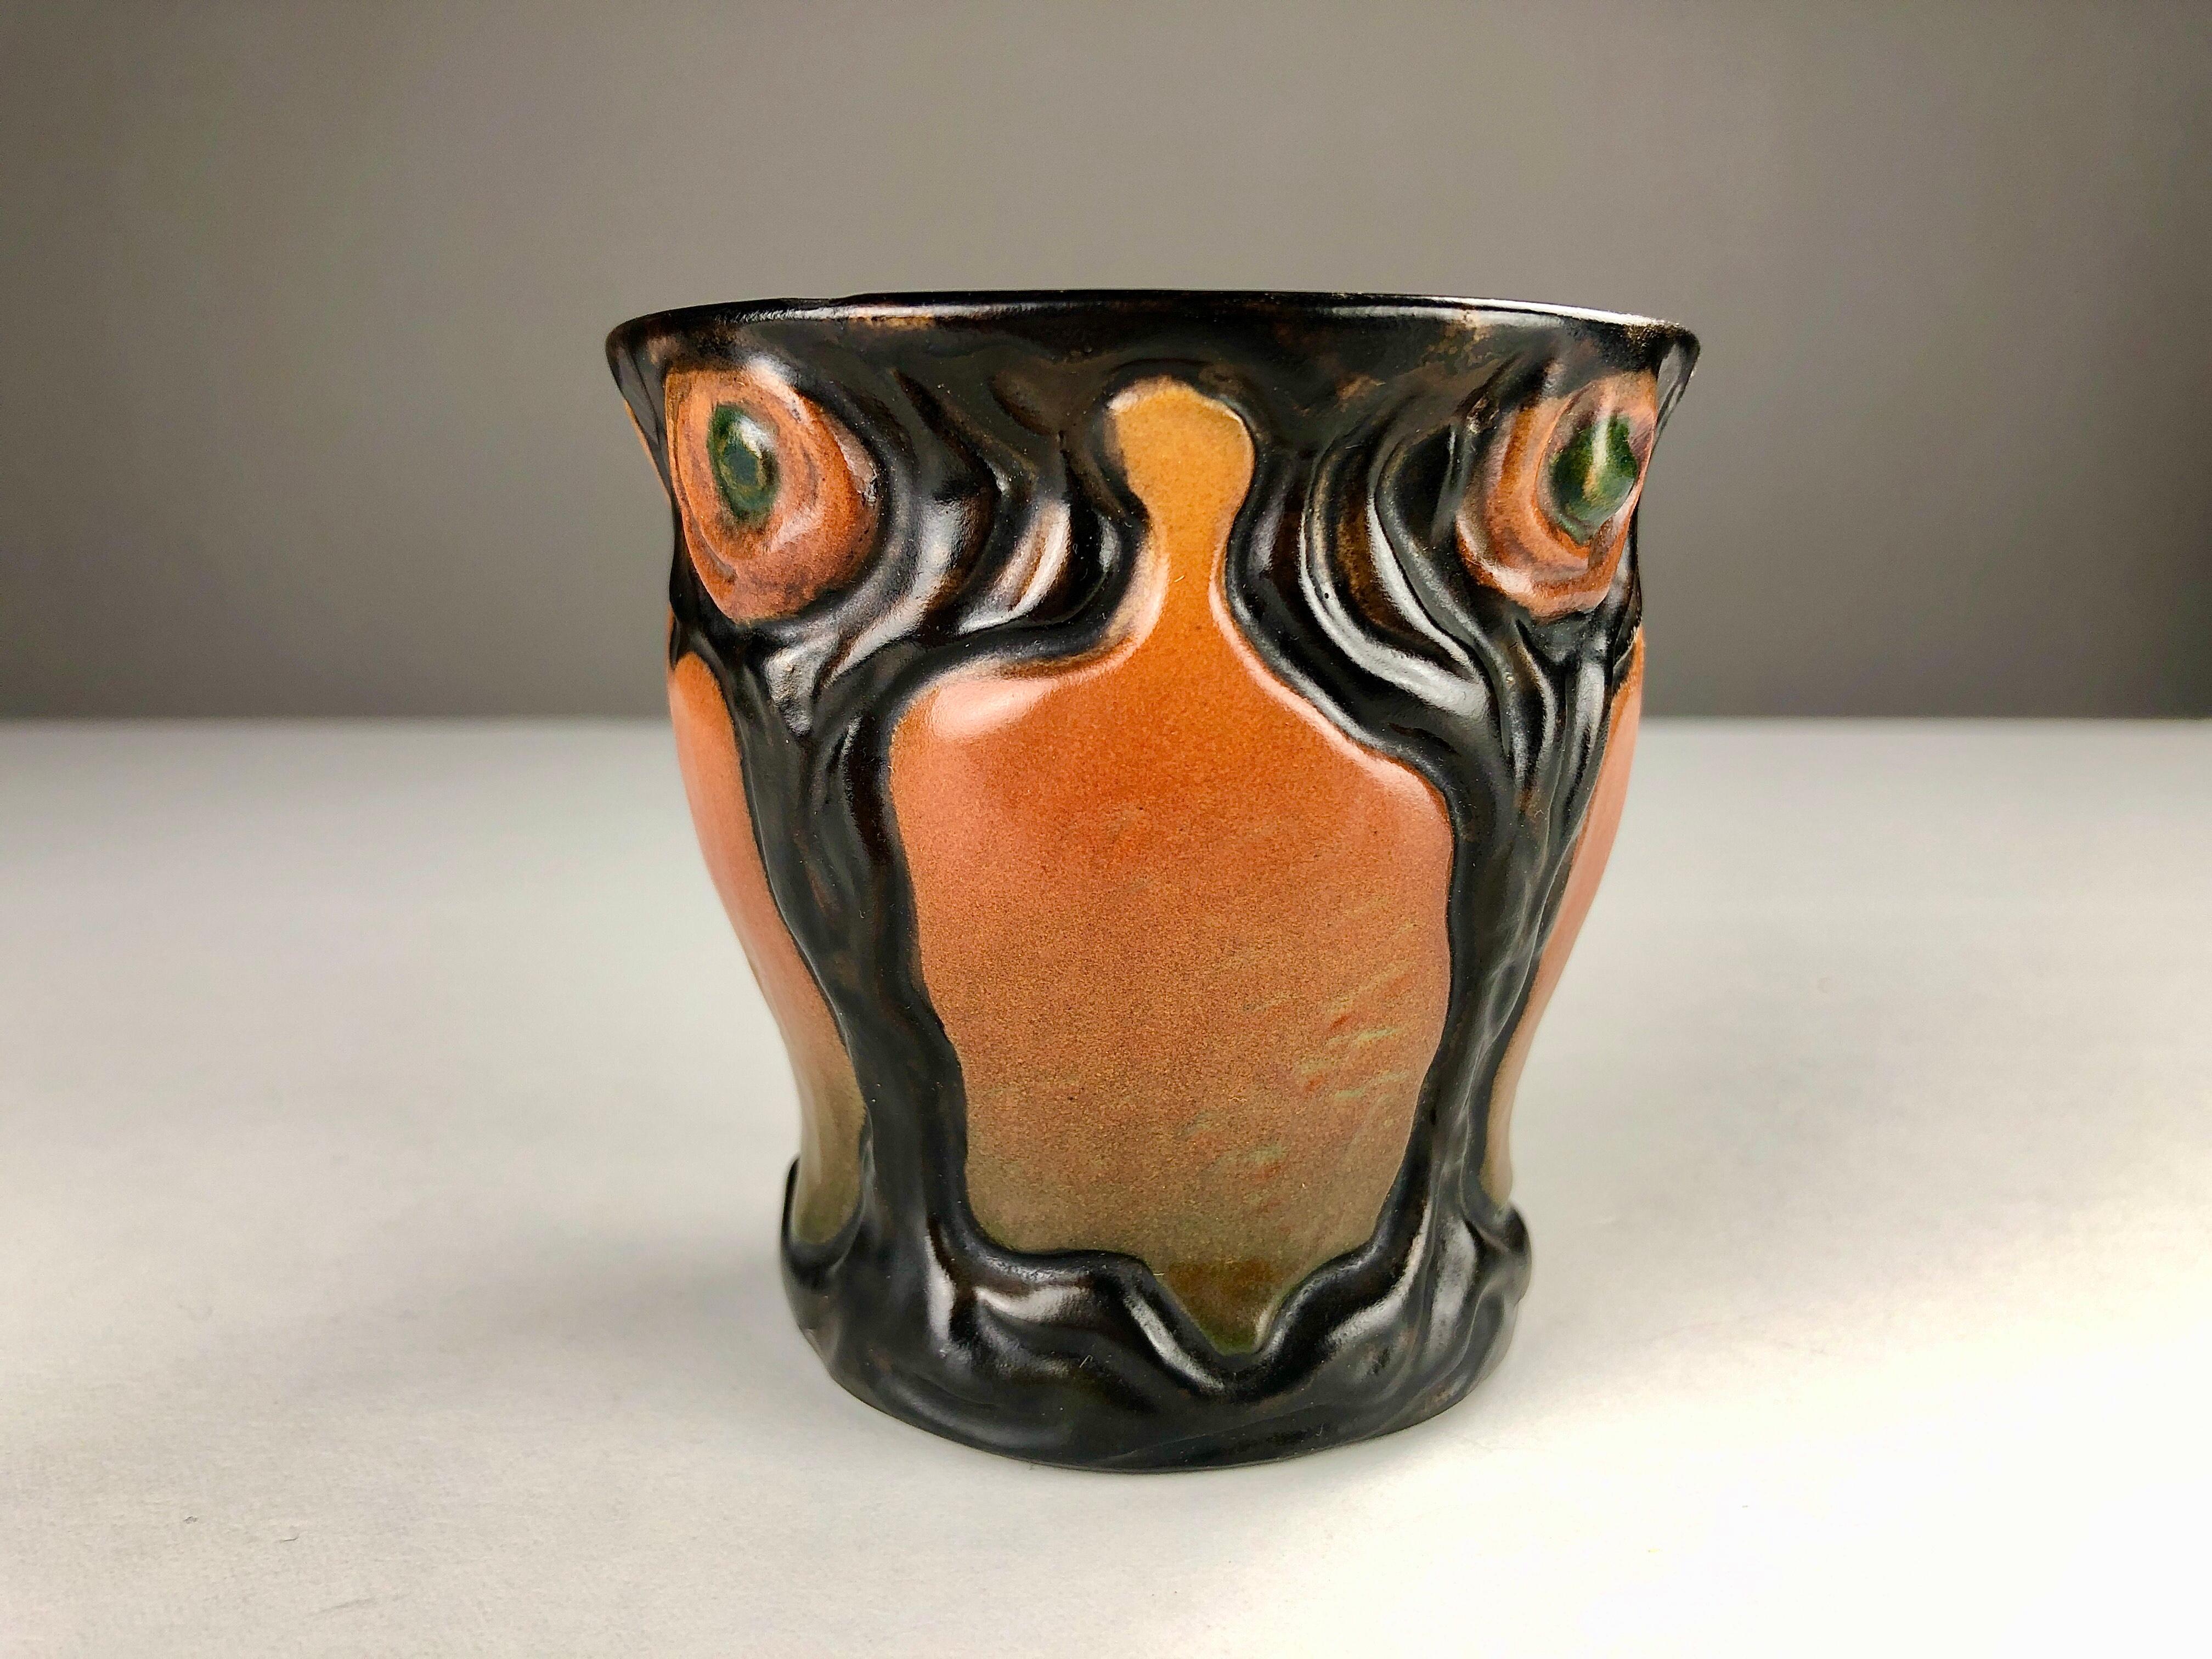 Hand-crafted small Danish Art Nouveau vase/bowl  by Axel Jensen for P. Ipsens Enke designed in 1905

The vase is in good vintage condition

Ipsens Enke (1843 - 1955) was a very succesfull company that especially during the first part of the 1900´s